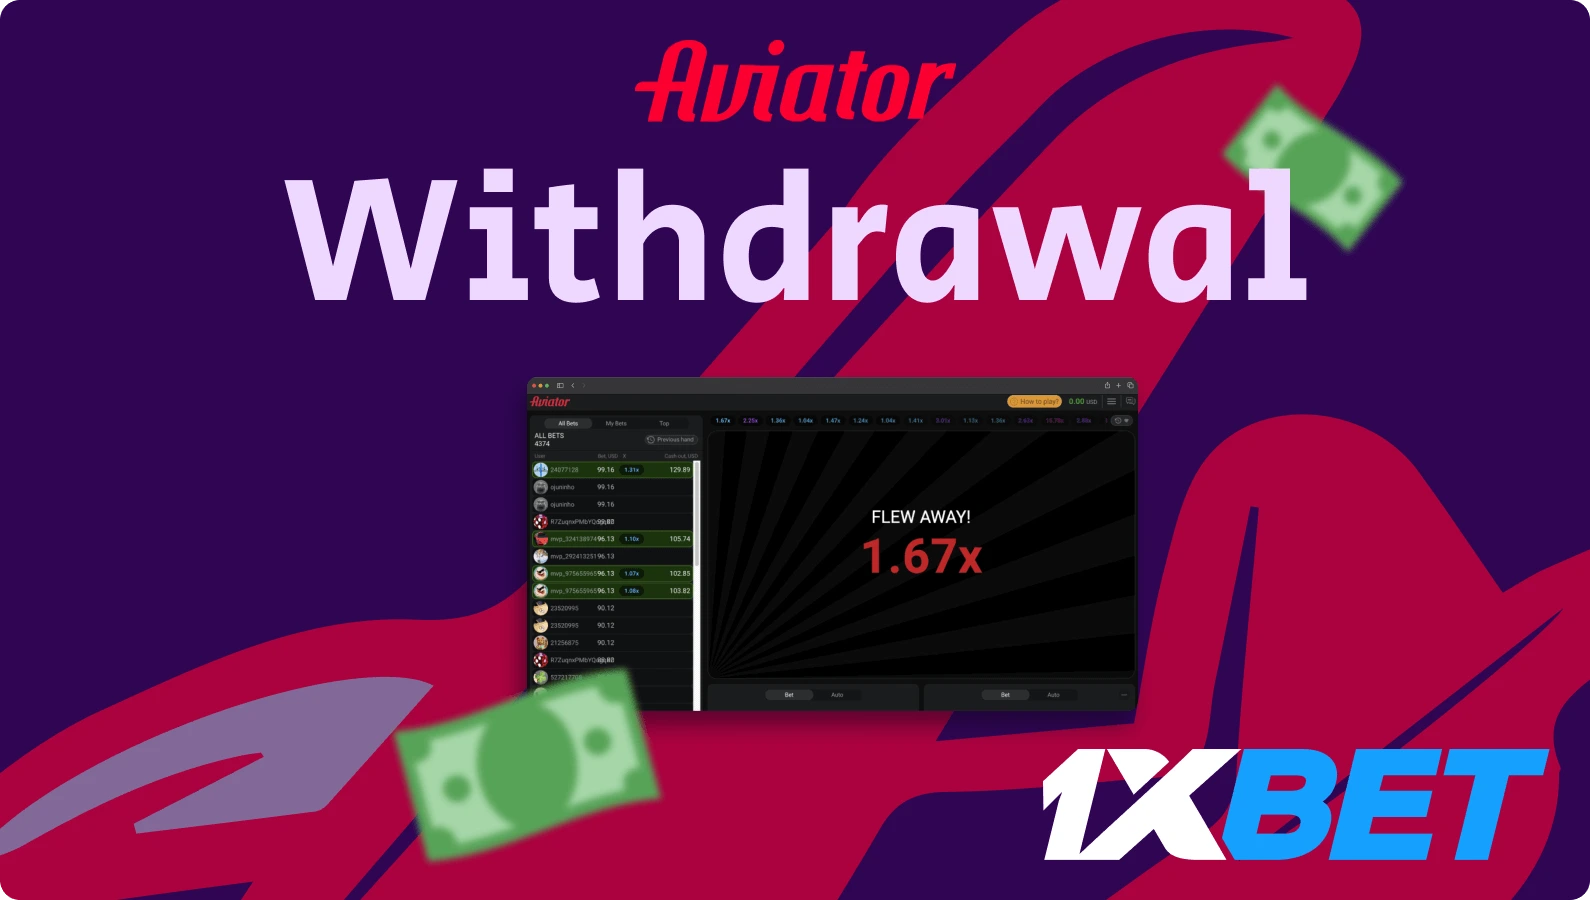 How to Withdraw from 1xBet